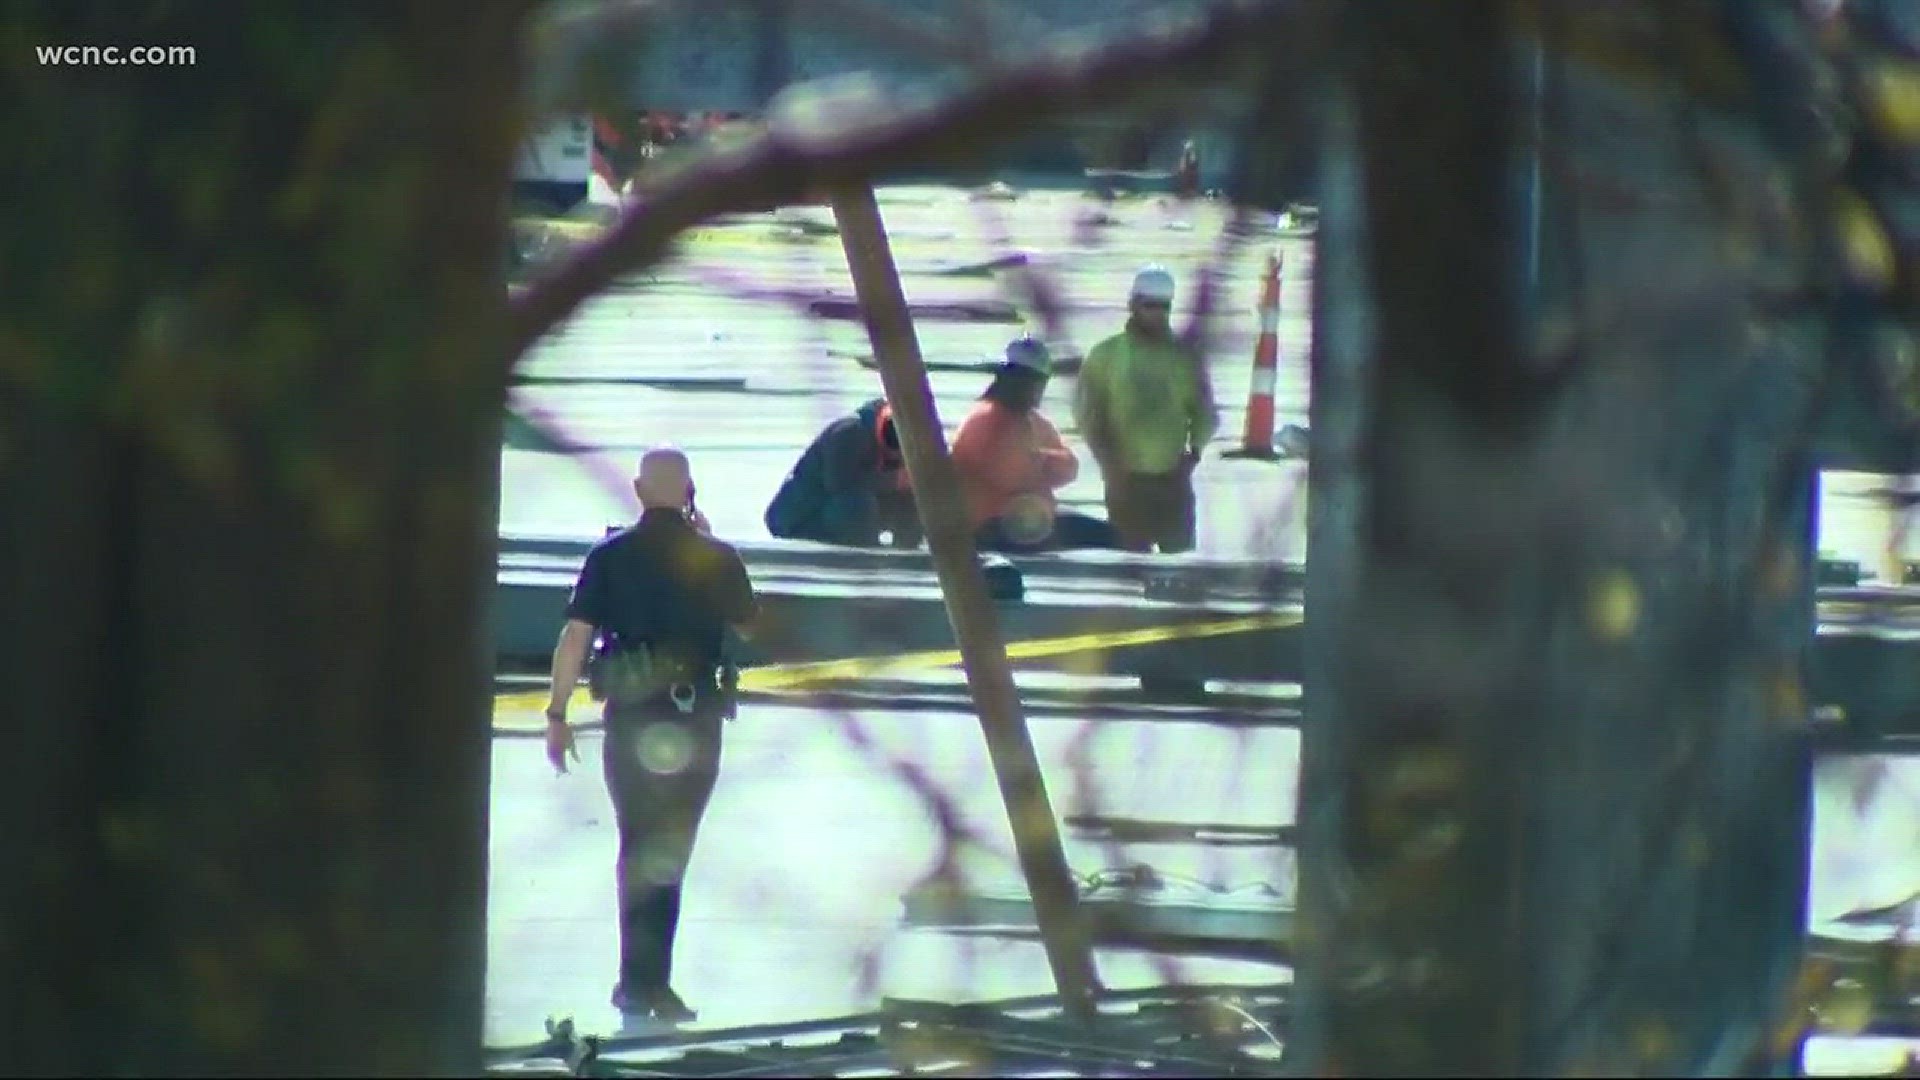 A worker has died and another was rushed to a hospital after falling about forty feet at a construction site near Steele Creek Sunday afternoon, according to CMPD.